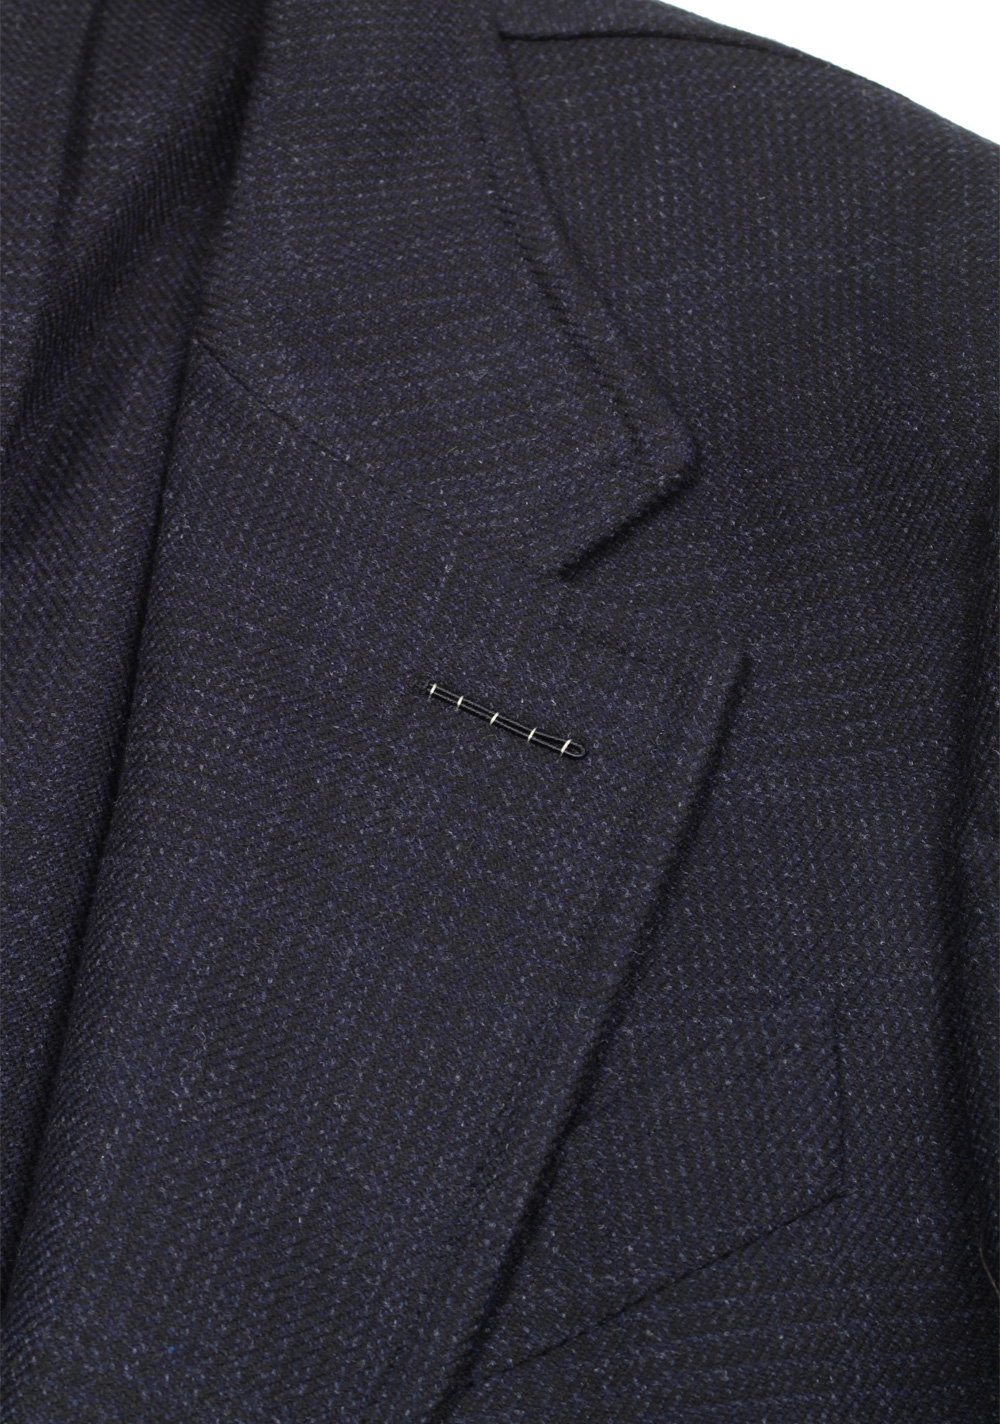 TOM FORD Shelton Checked Blue Sport Coat Size 46 / 36R In Wool Cashmere | Costume Limité